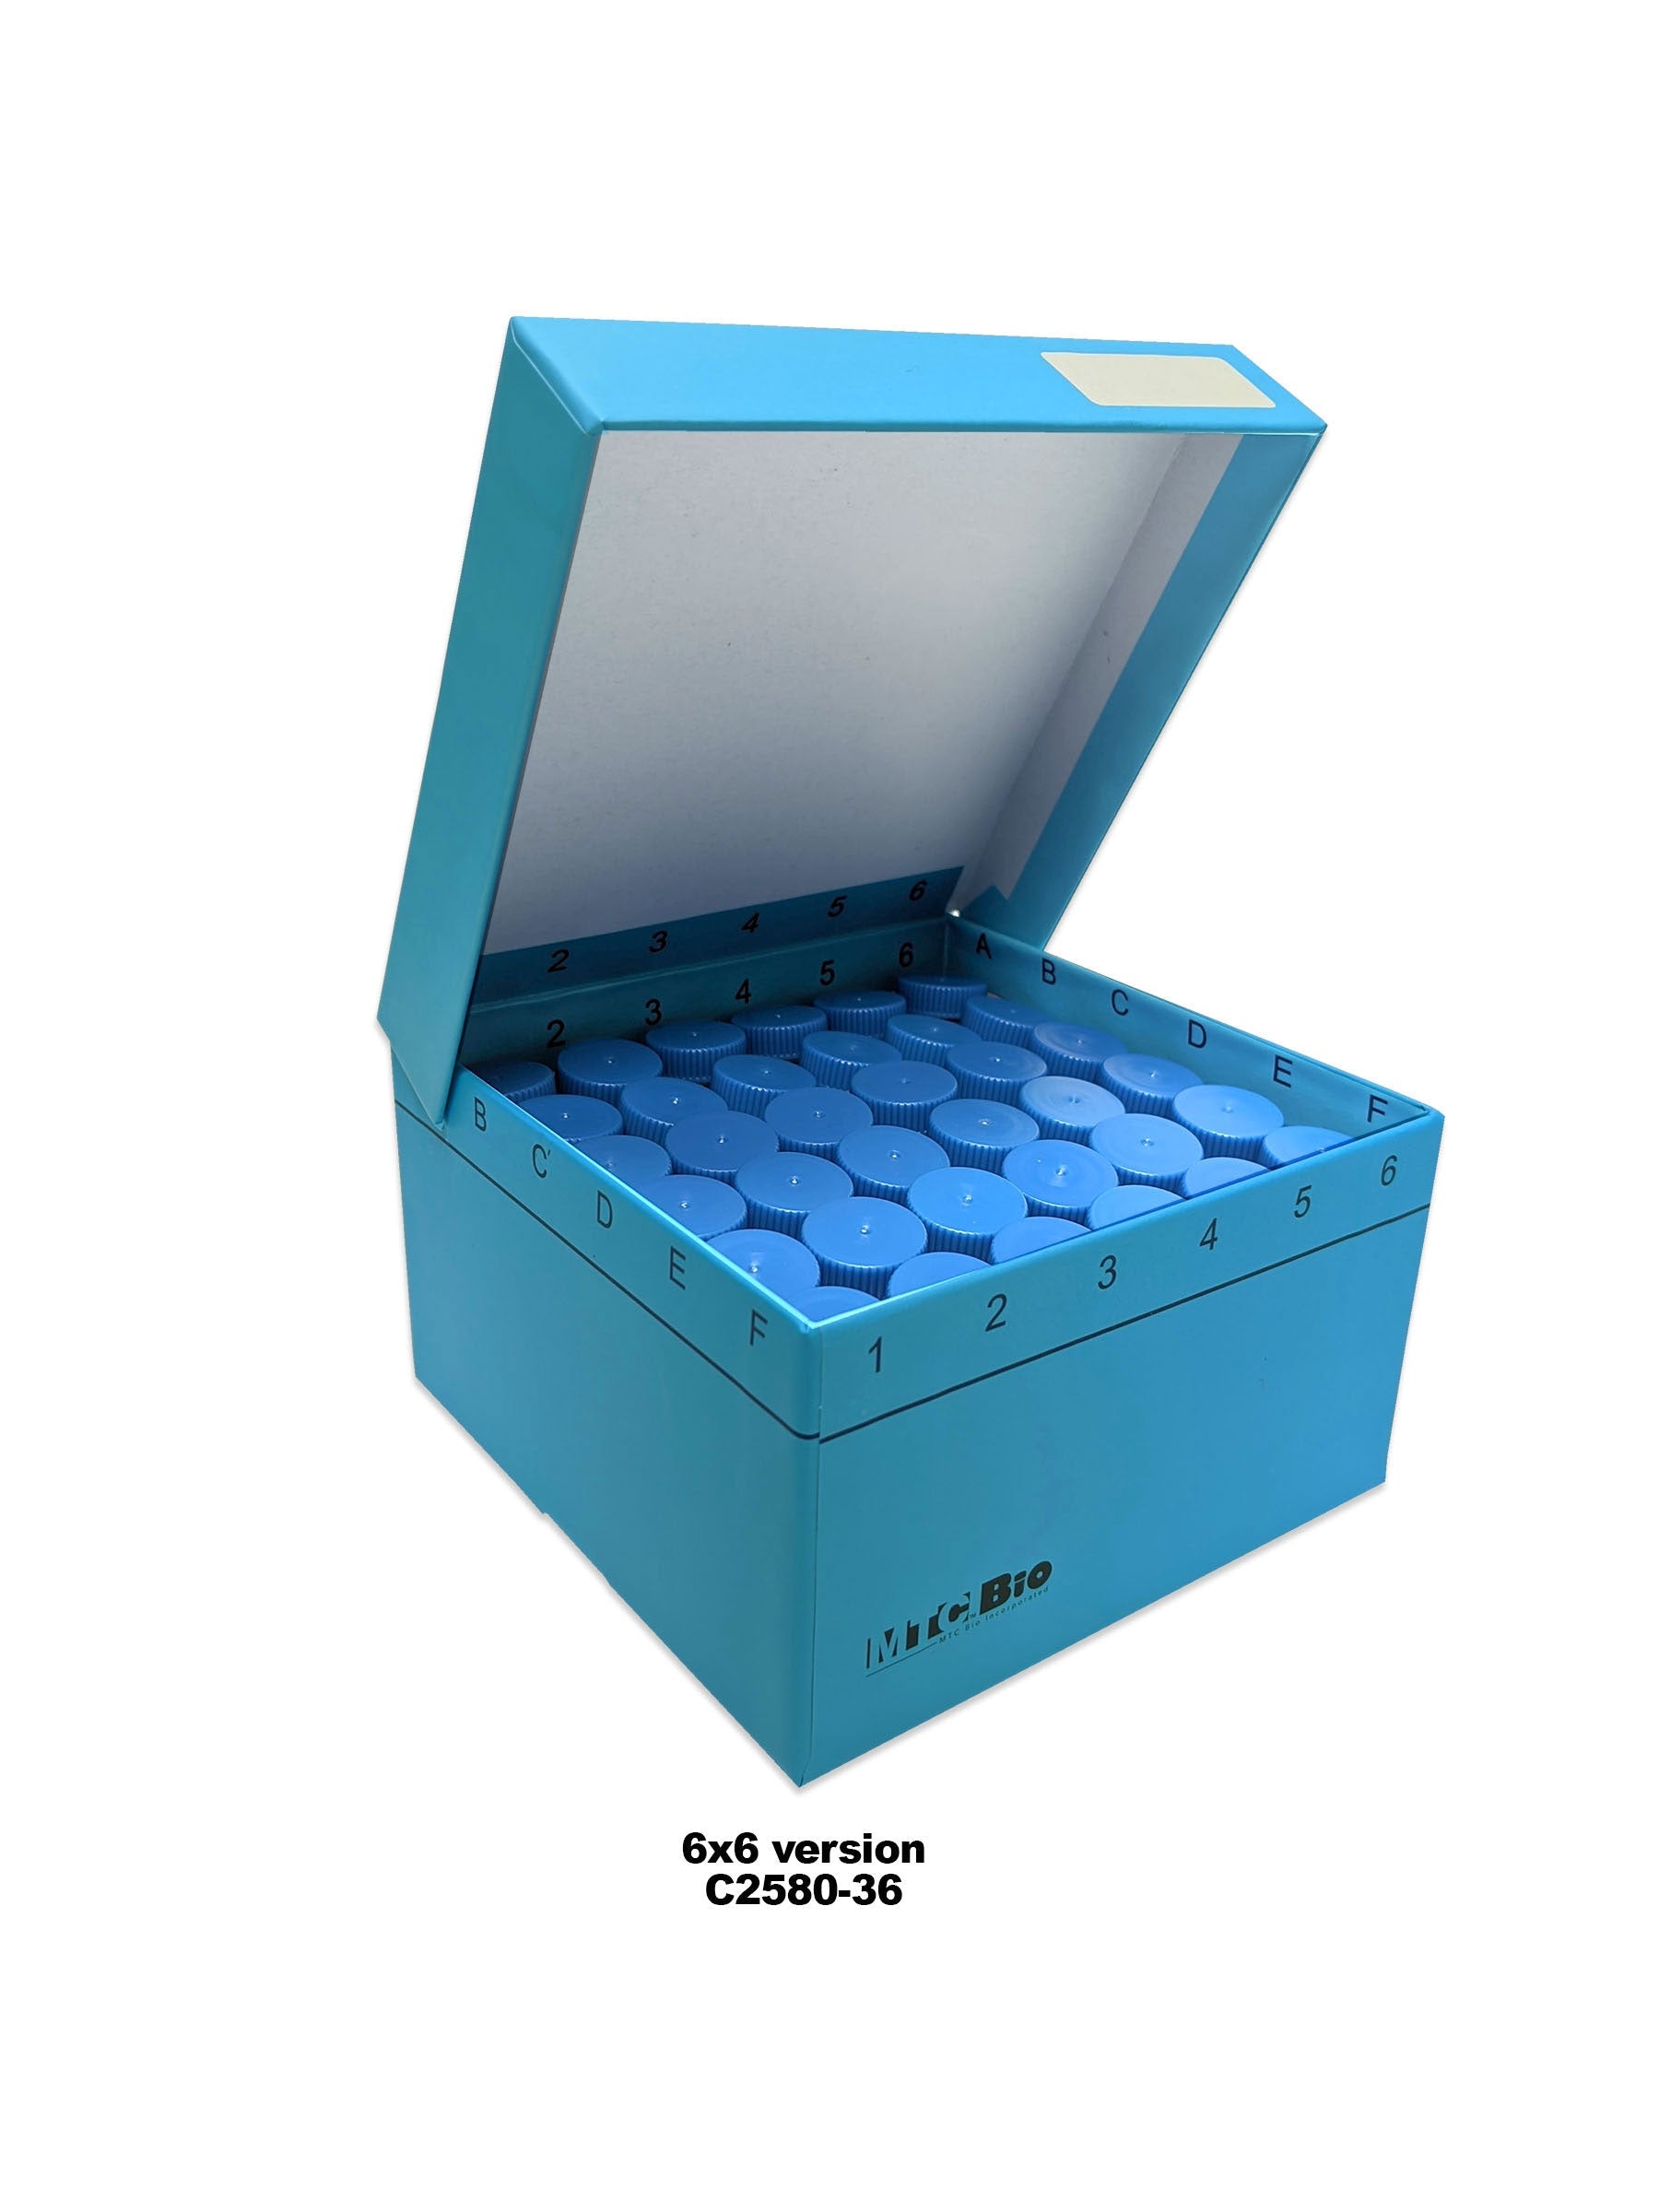 MTC Bio C2580-36, Cardboard Freezer Box with Hinged Lid, 3 Inch, with Insert for 36 Srew-Cap 5ml Macrotubes, 5.25 x 5.25 x 3 Inches, 5/pk